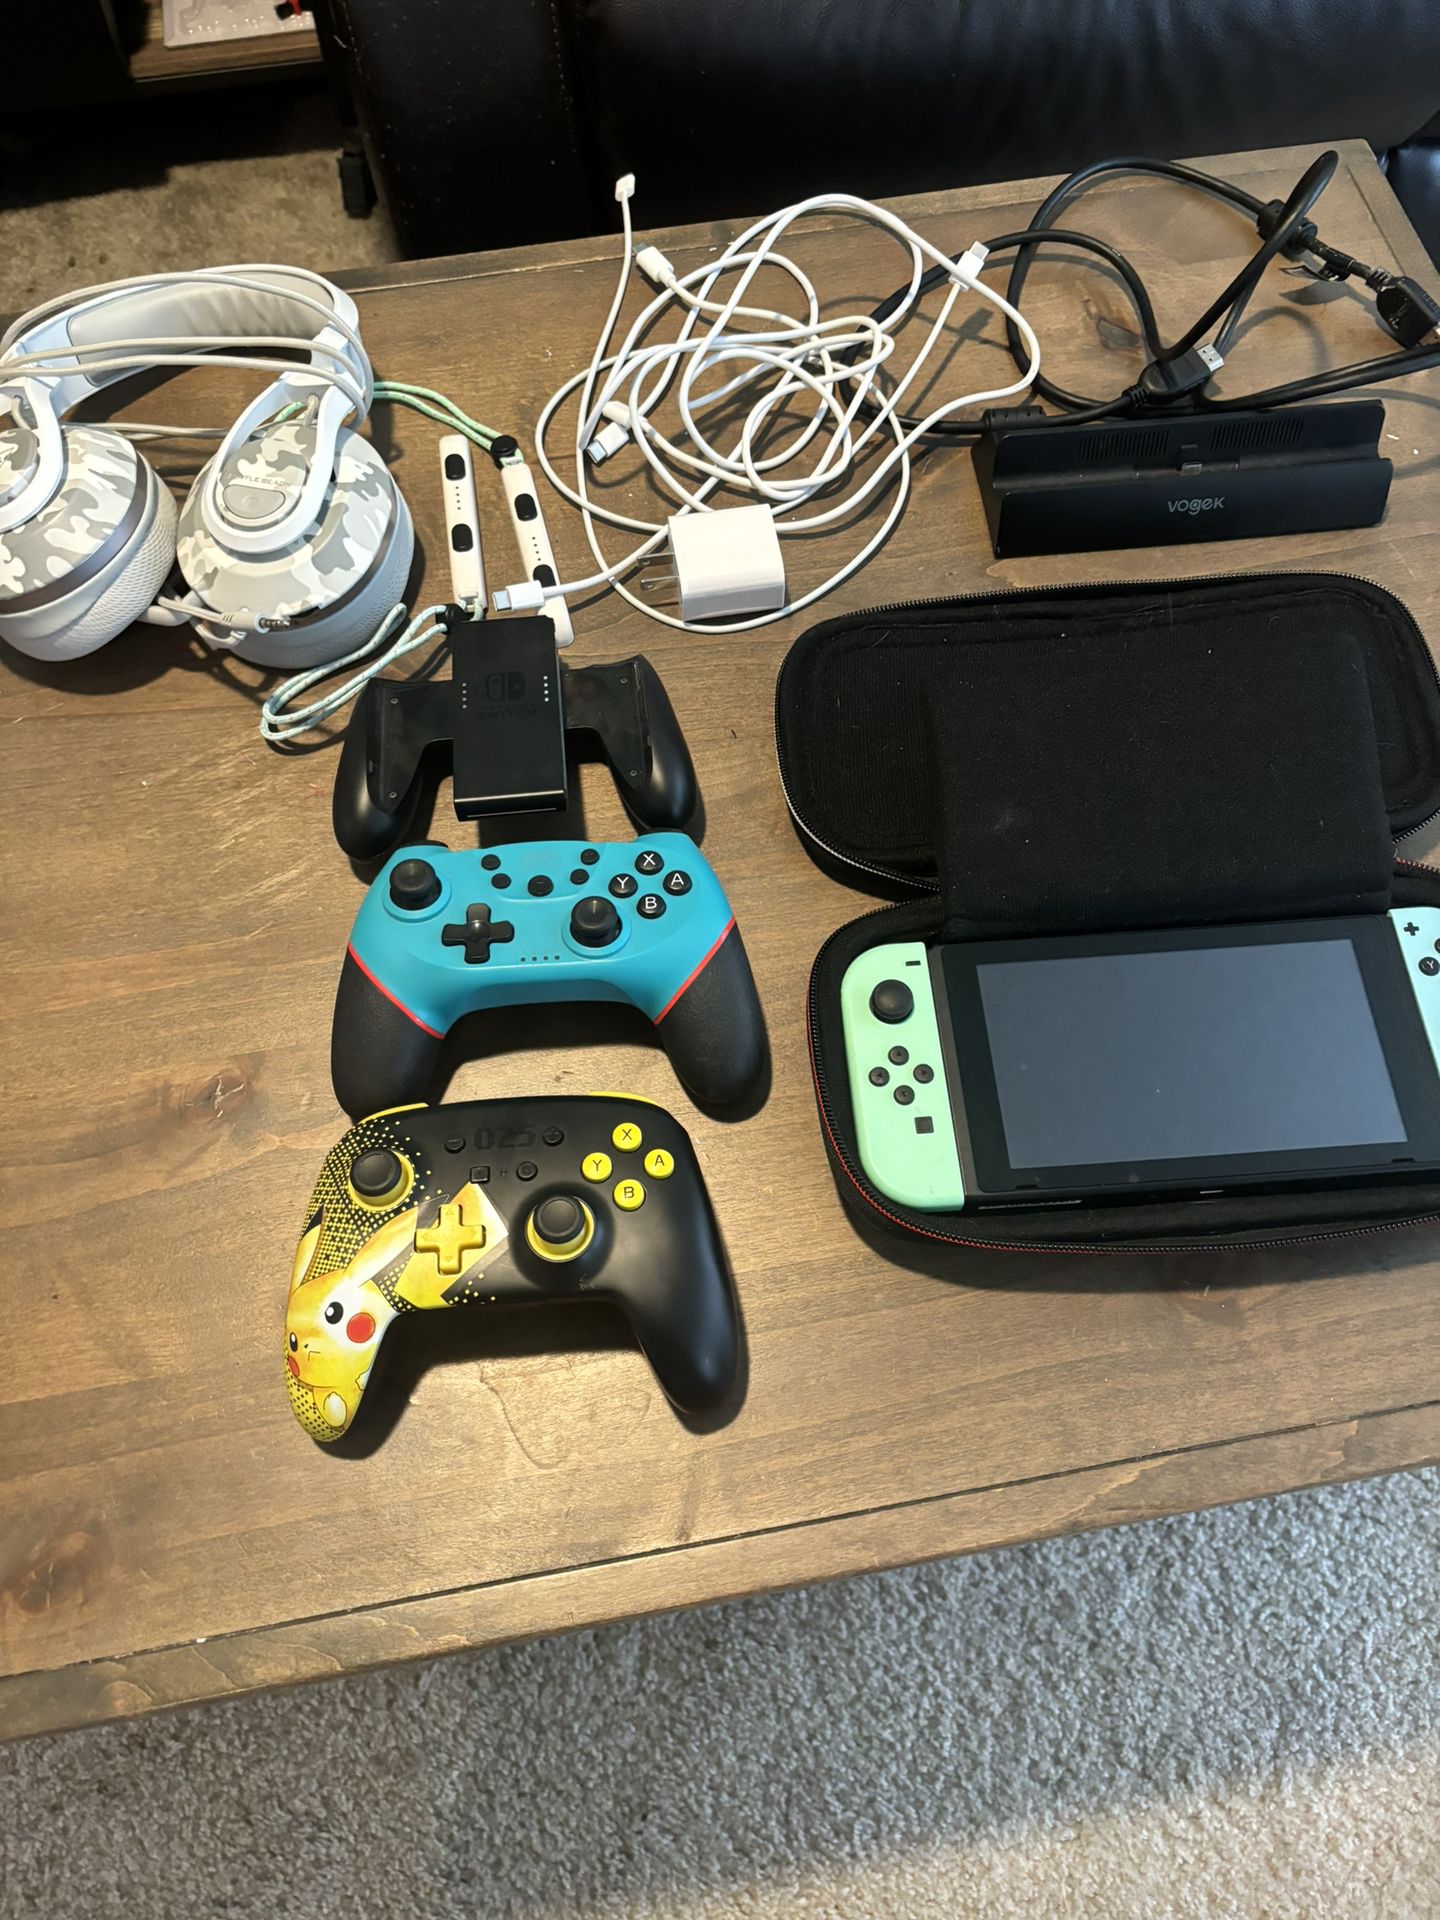 Amazing Switch Deal. Everything You See In The Picture